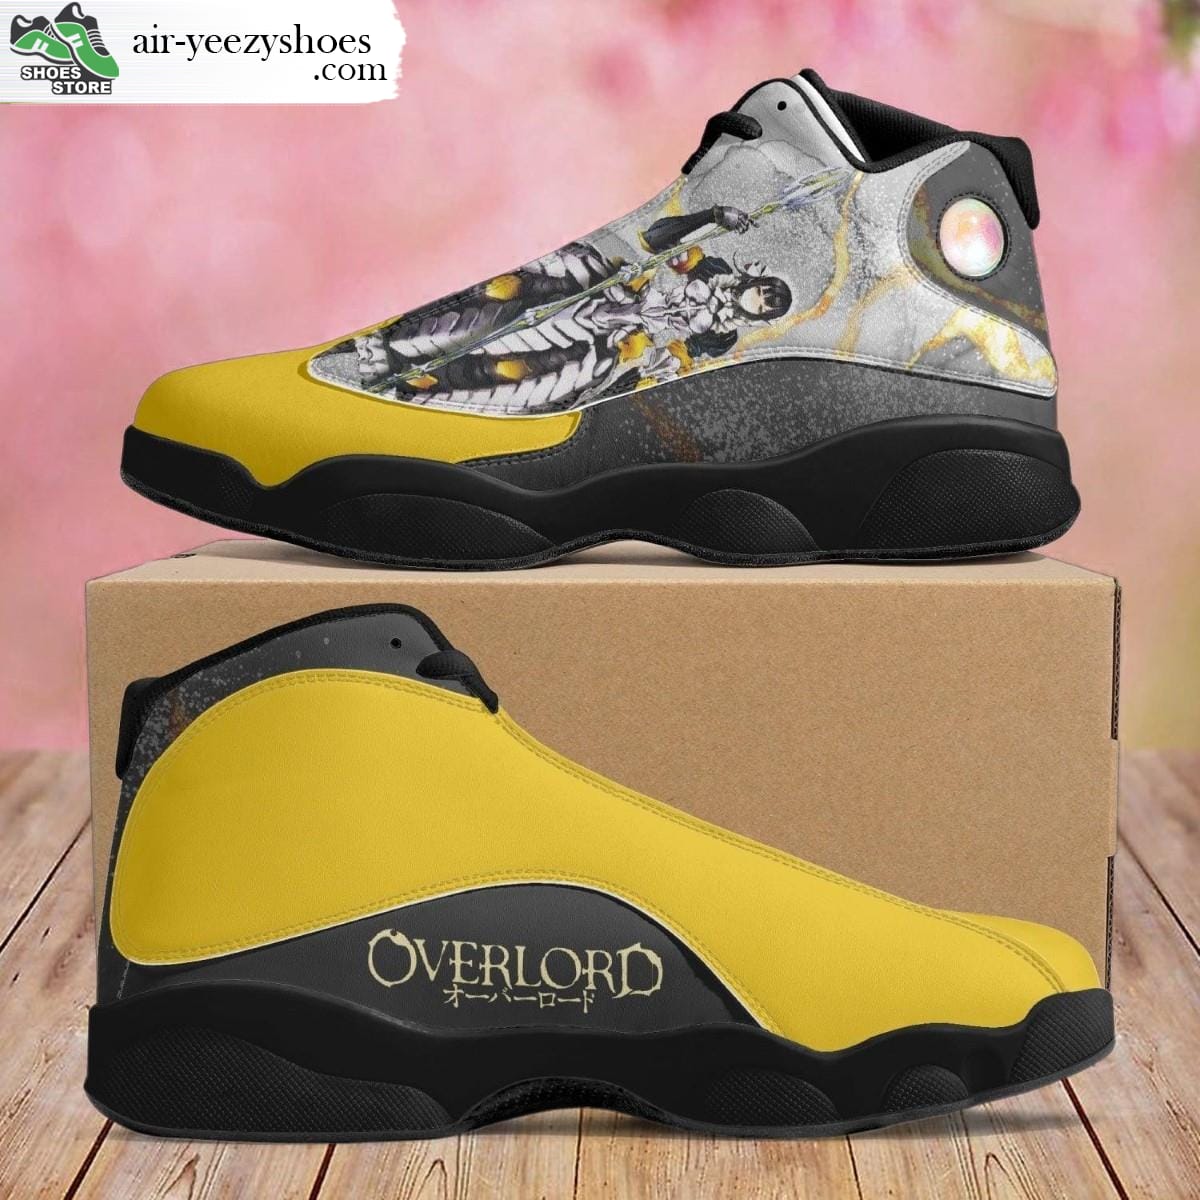 Narberal Gamma Jordan 13 Shoes, Overlord Gift